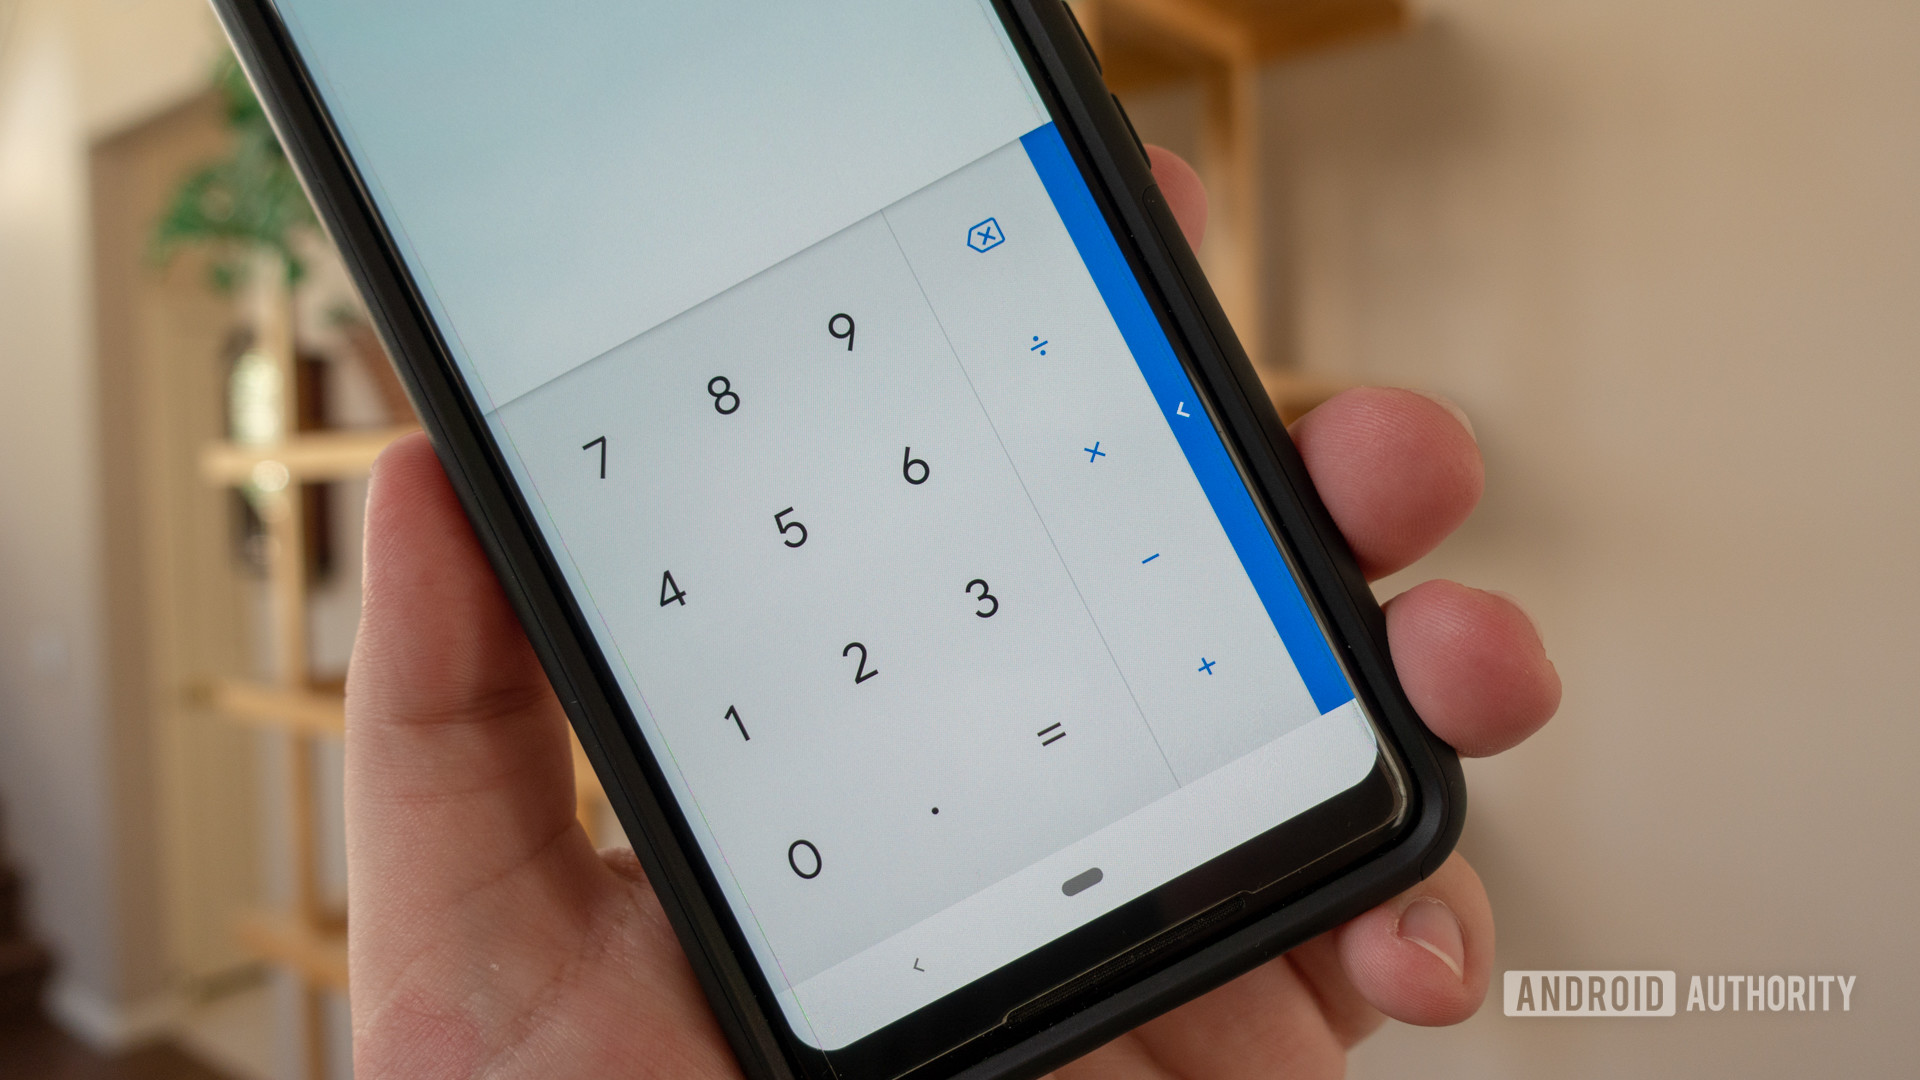 10 best calculator apps for Android